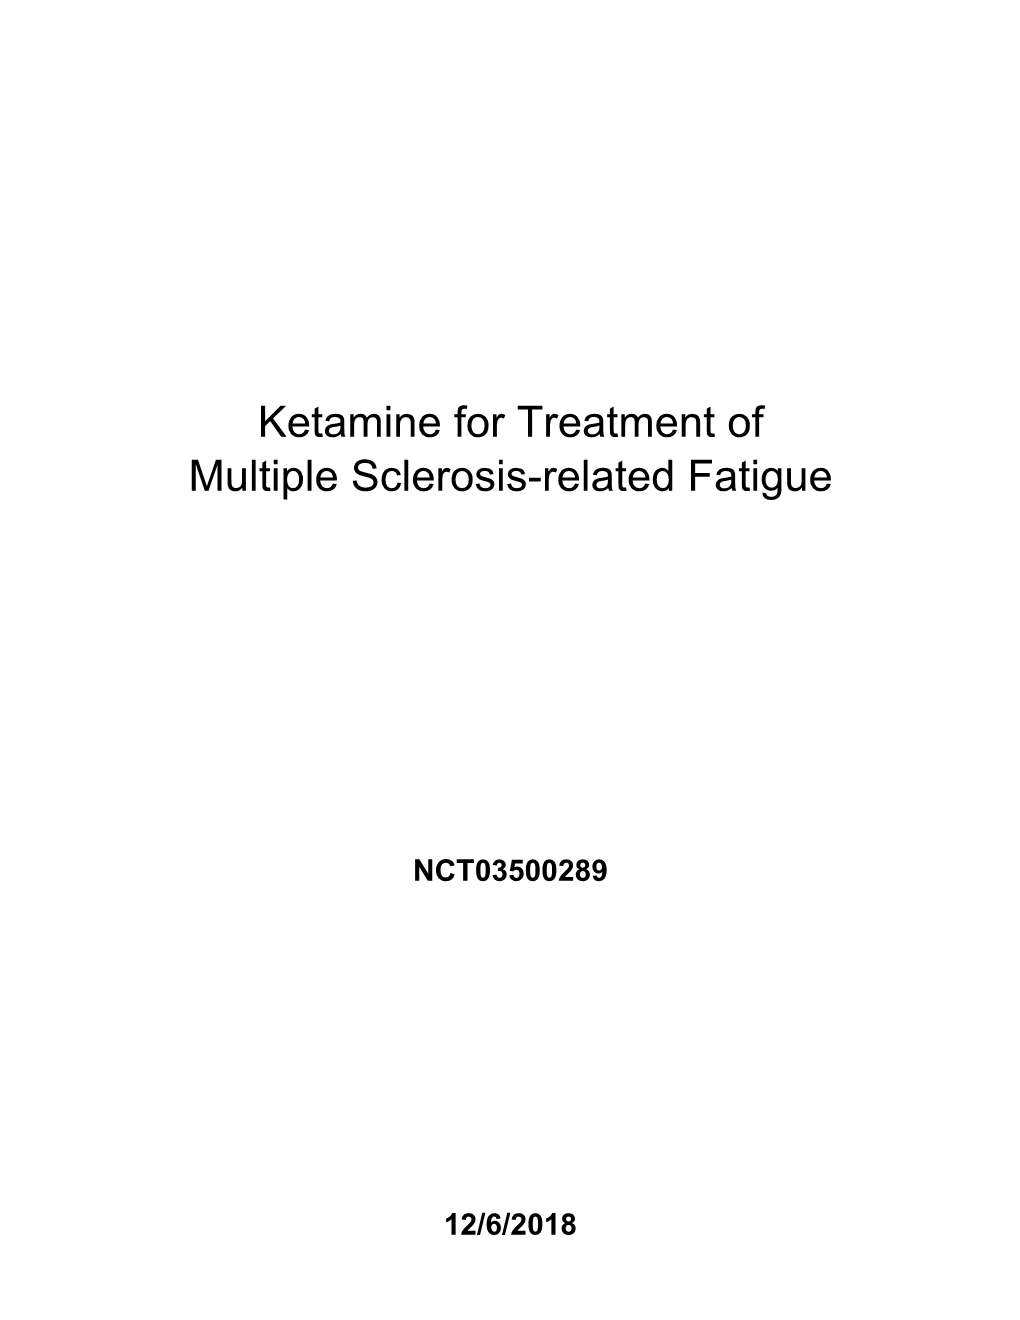 Ketamine for Treatment of Multiple Sclerosis-Related Fatigue